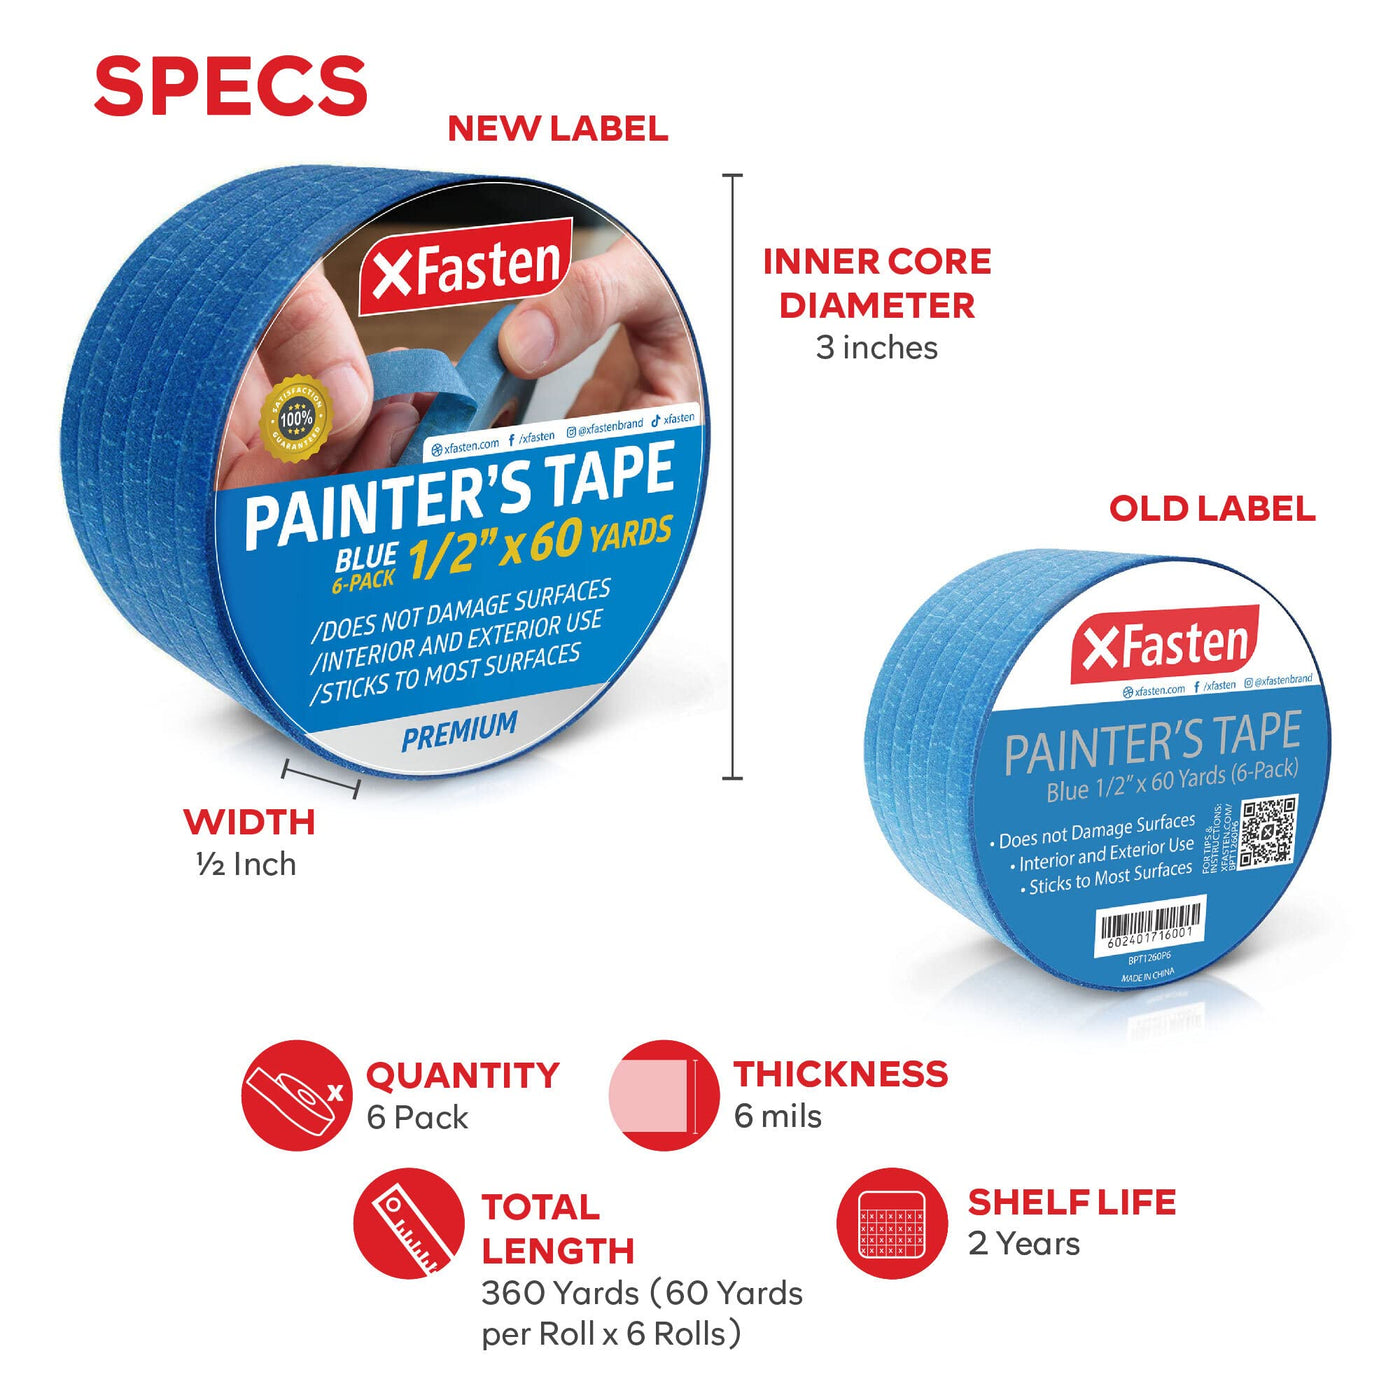 Baijixin Colored Masking Tape - 12 Colors 12mm x10m, 12 Rolls, Clear